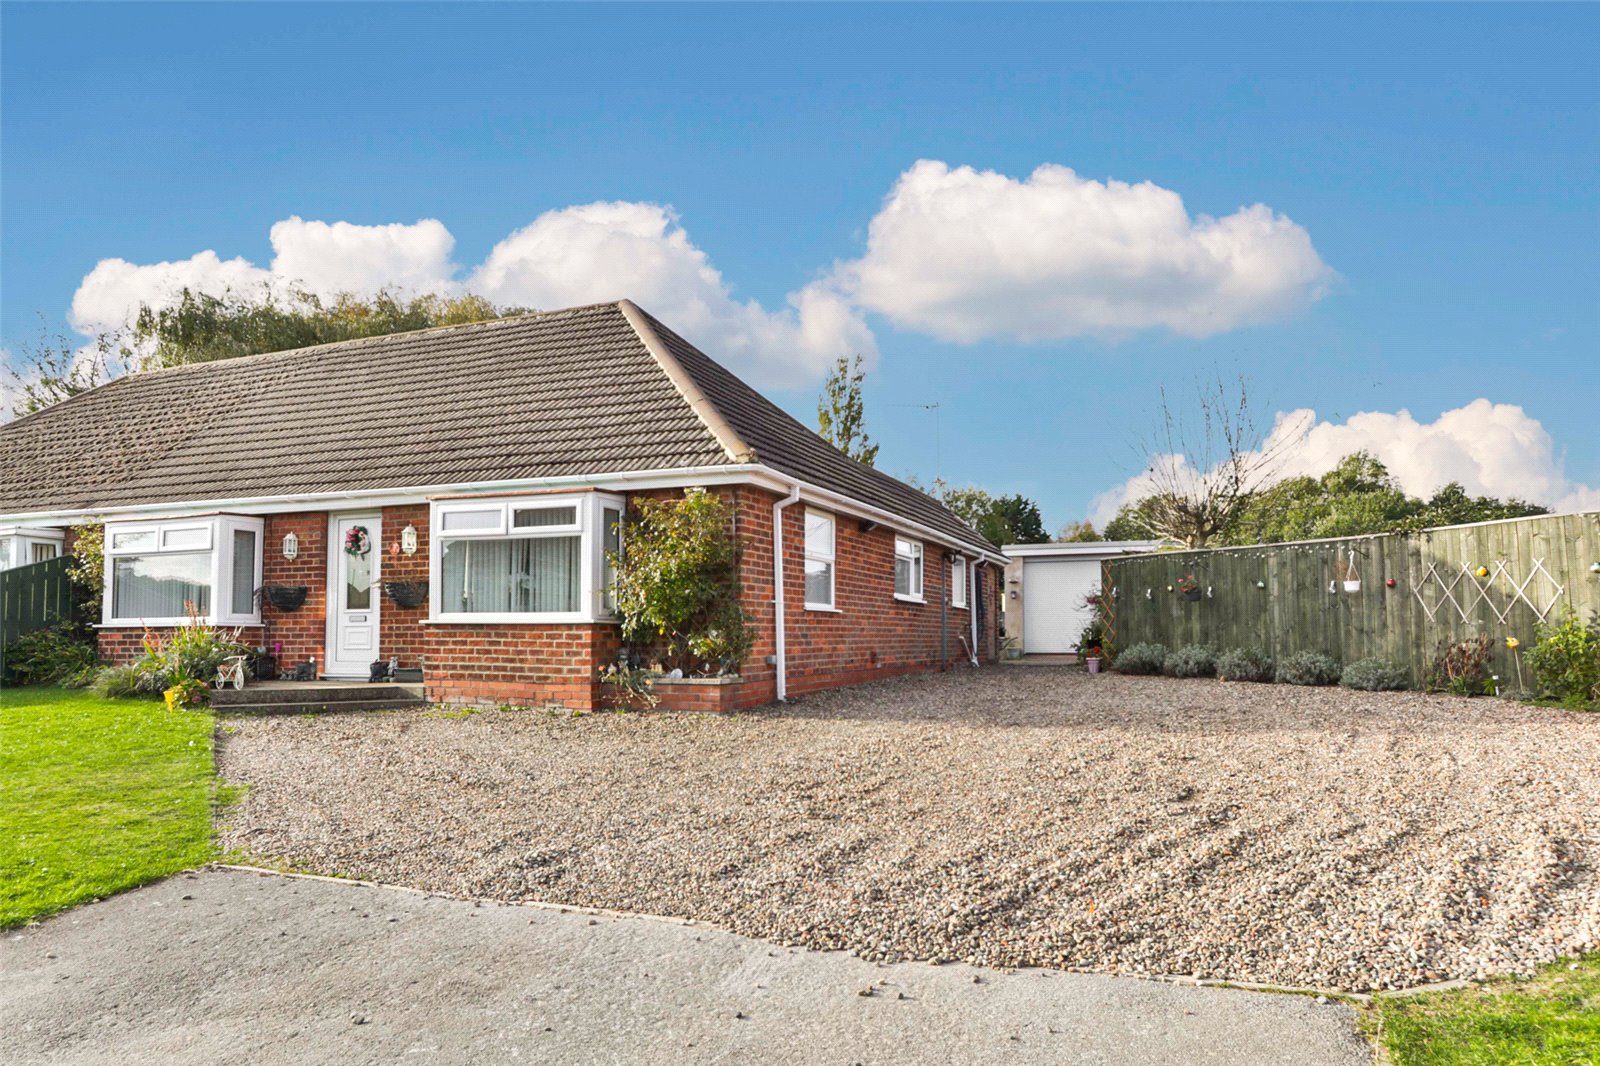 2 bed bungalow for sale in East End Road, Preston, HU12